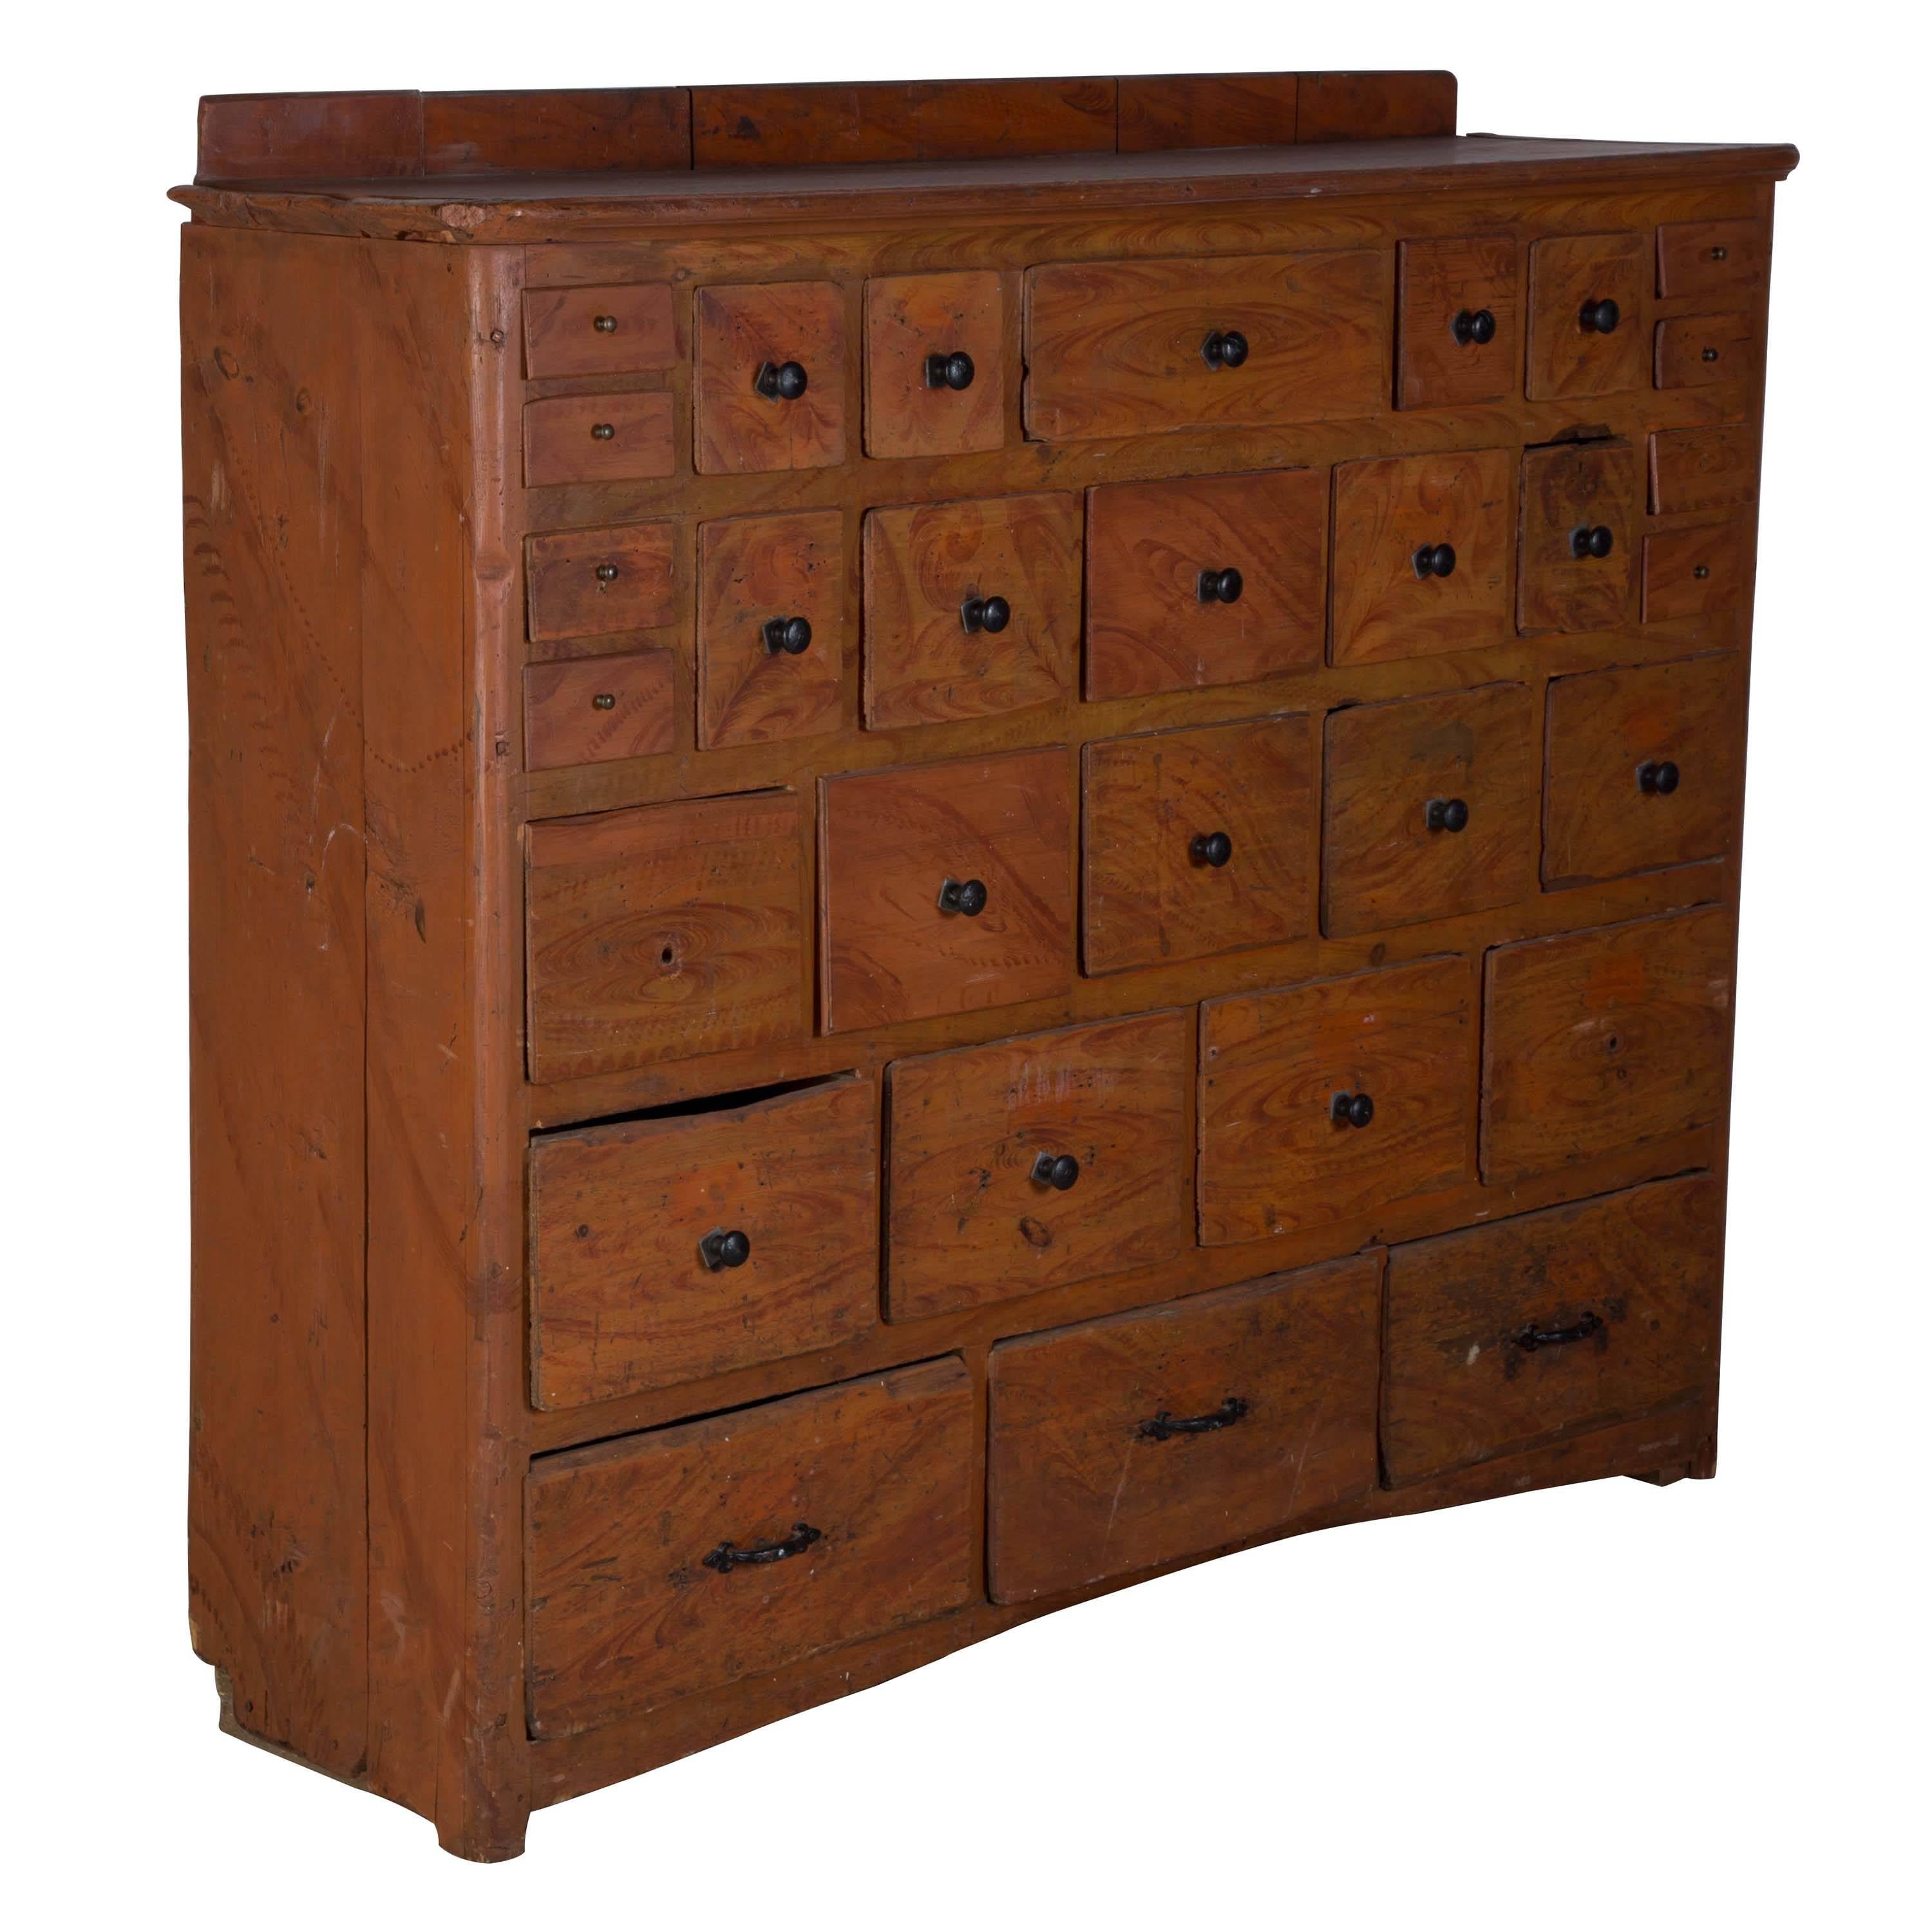 Primitive 19th century bank of drawers in original paint from North Sweden, circa 1850.